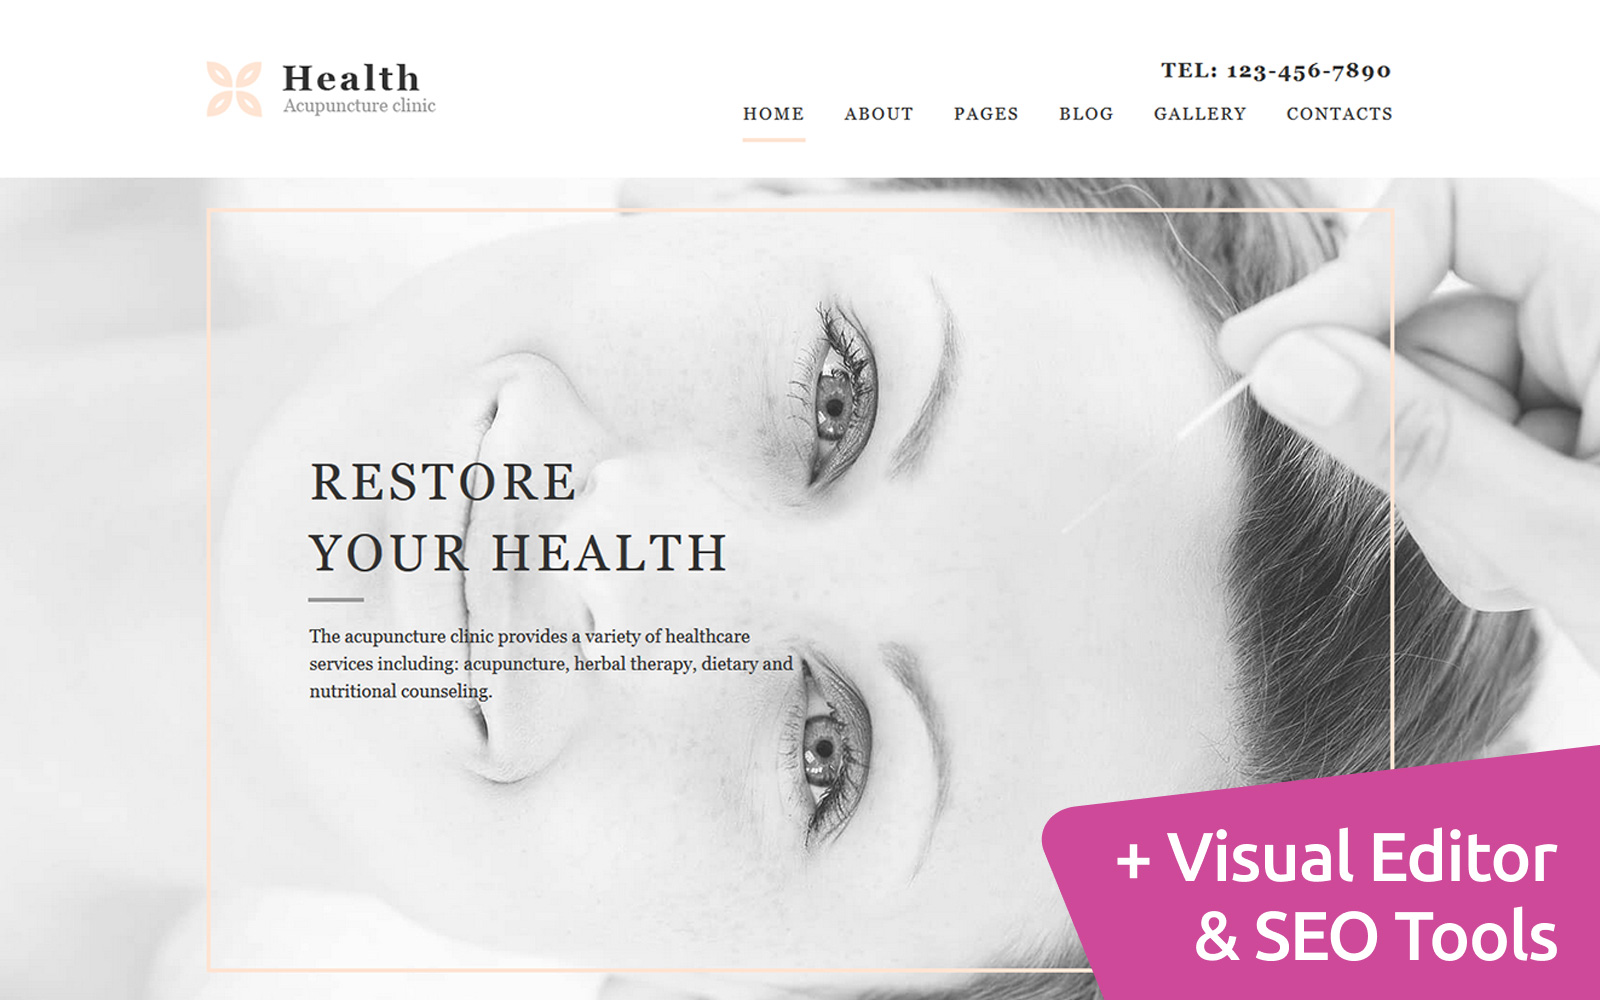 Health - Acupuncture Clinic Moto CMS 3 Template